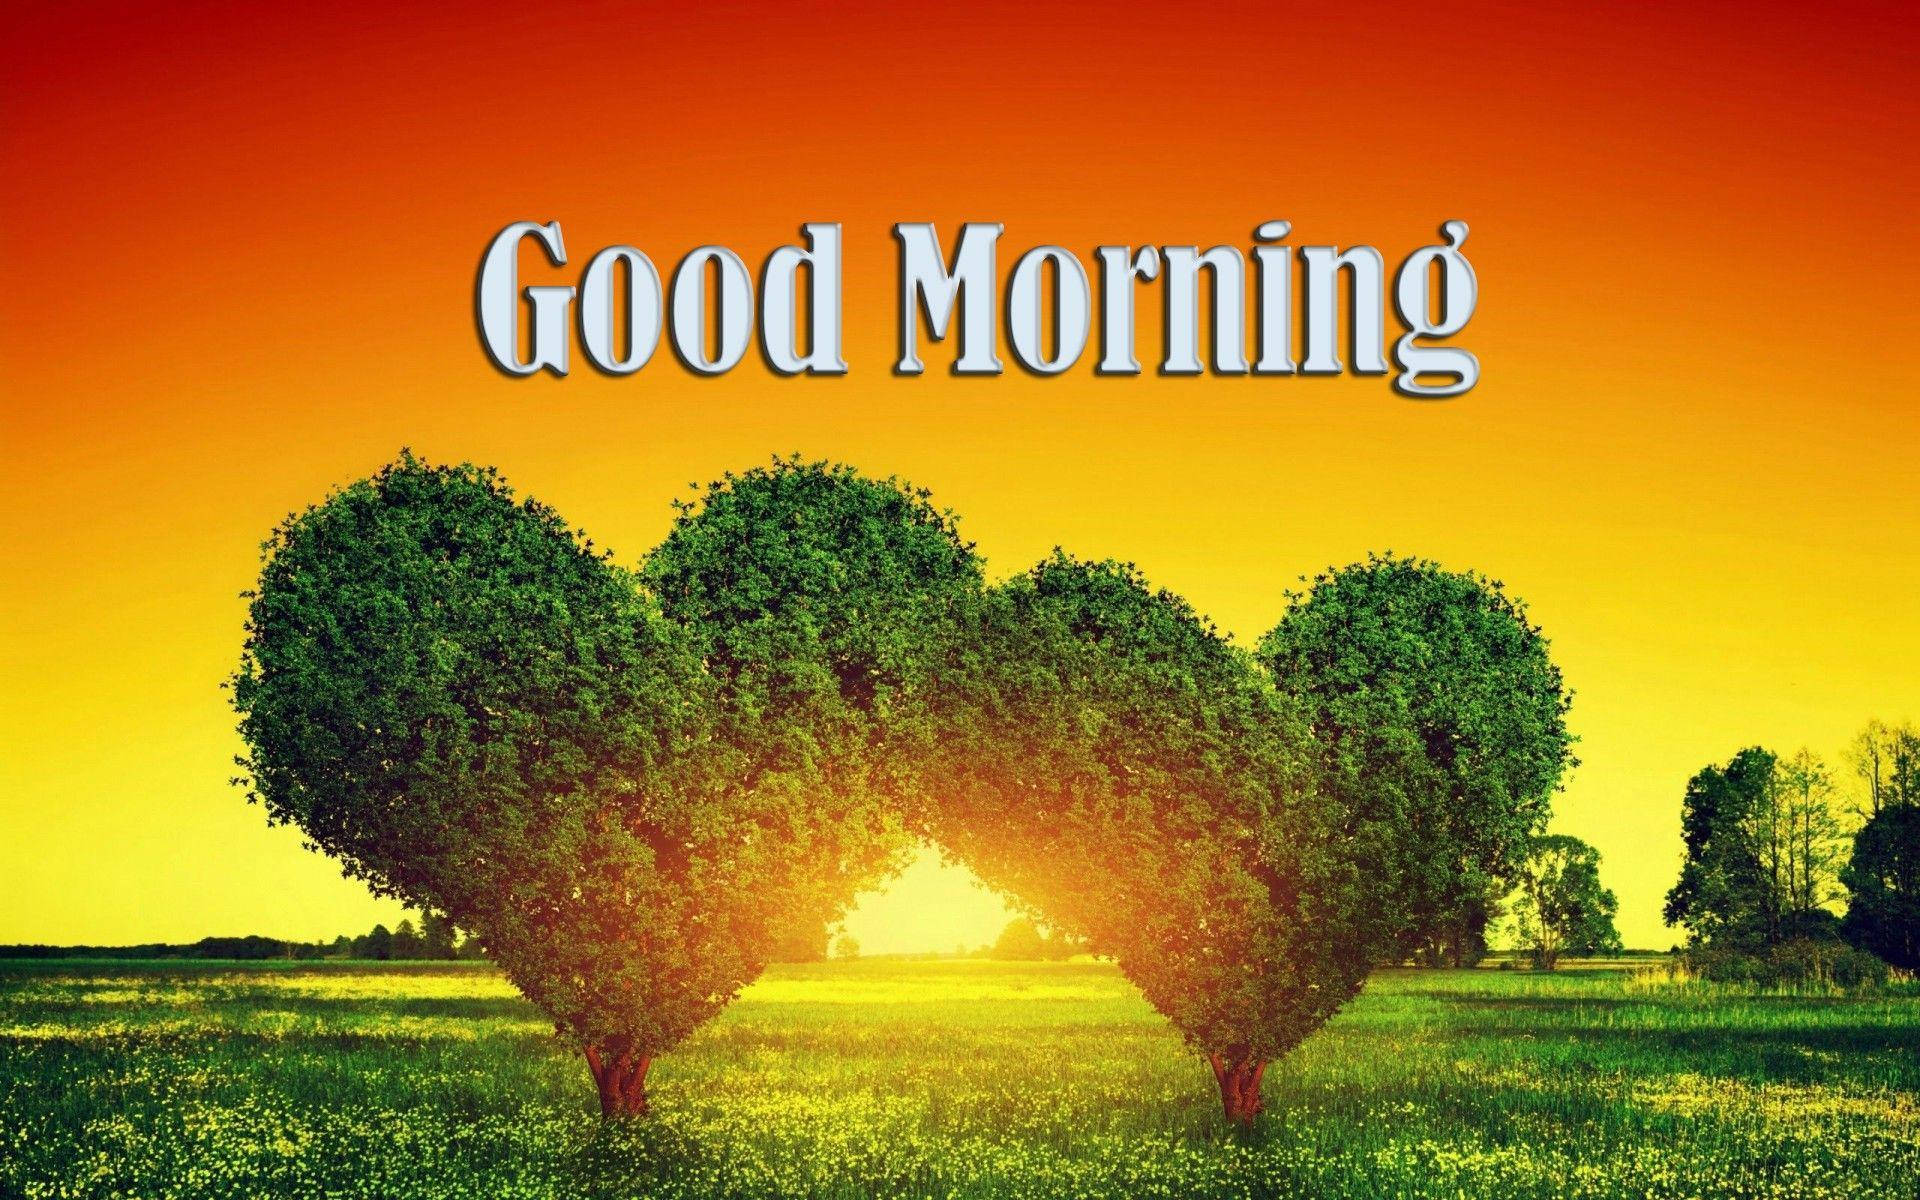 Good Morning Hd With Heart Trees